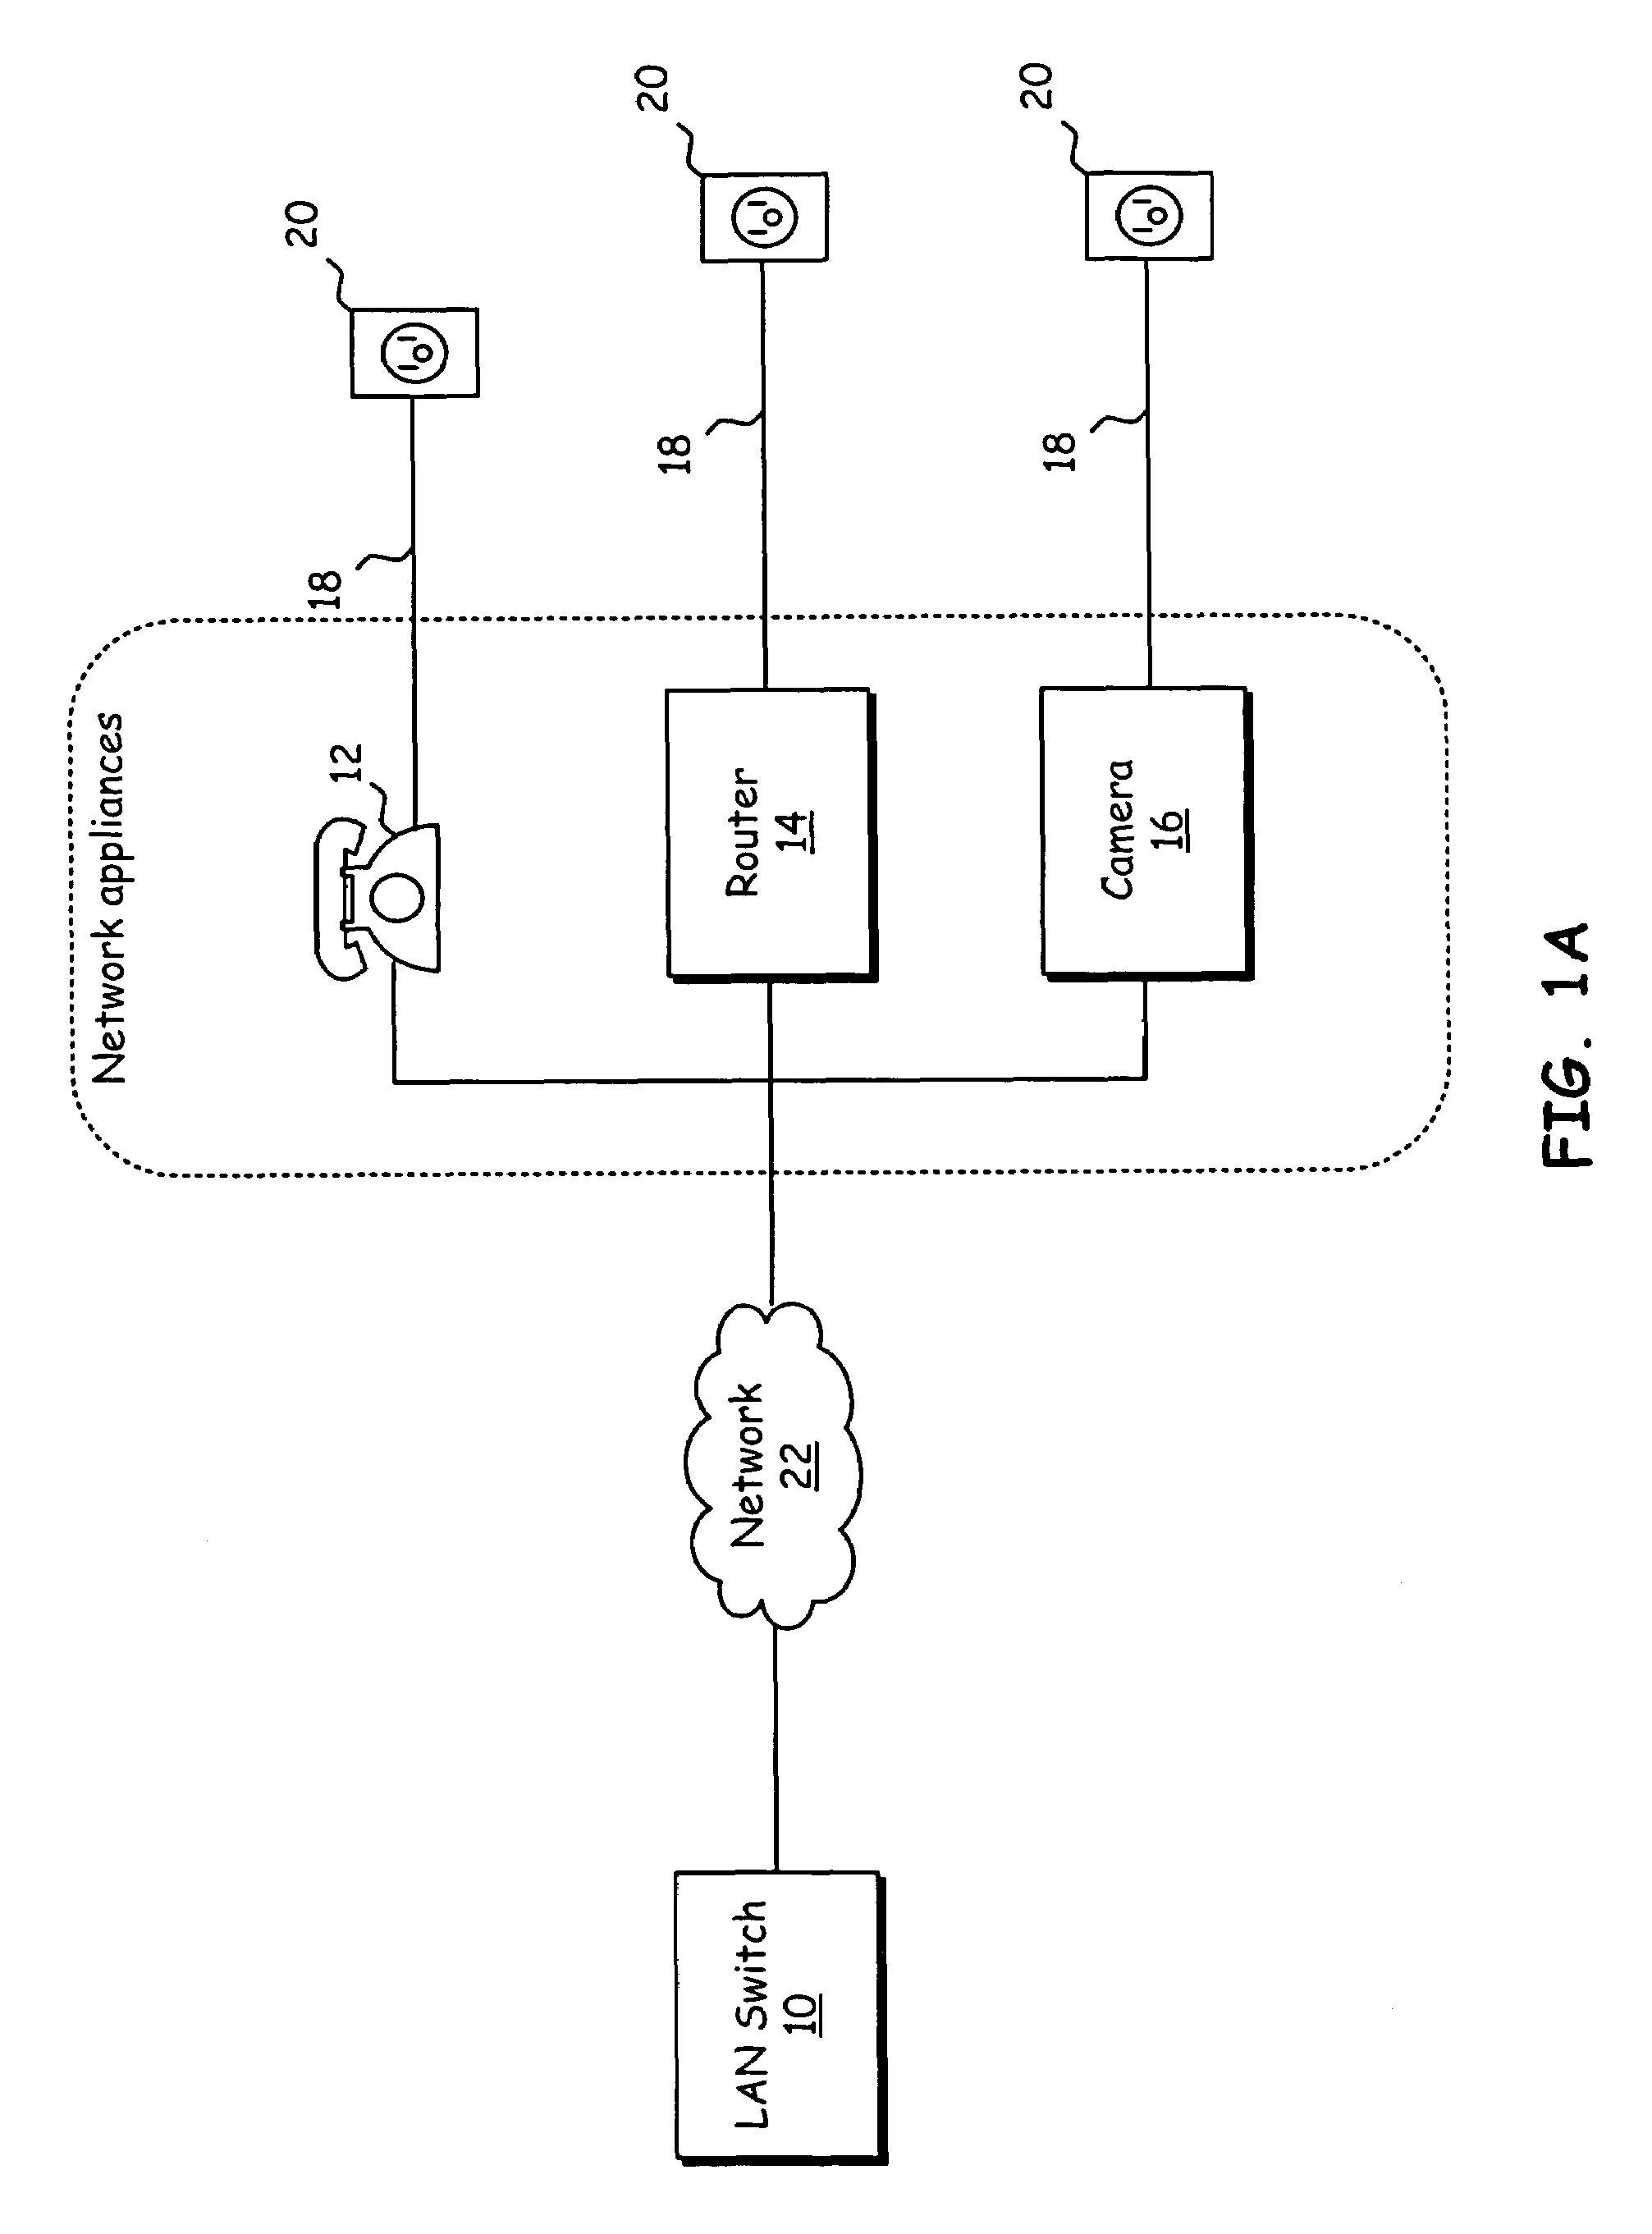 Integrated DC/DC converter substrate connections